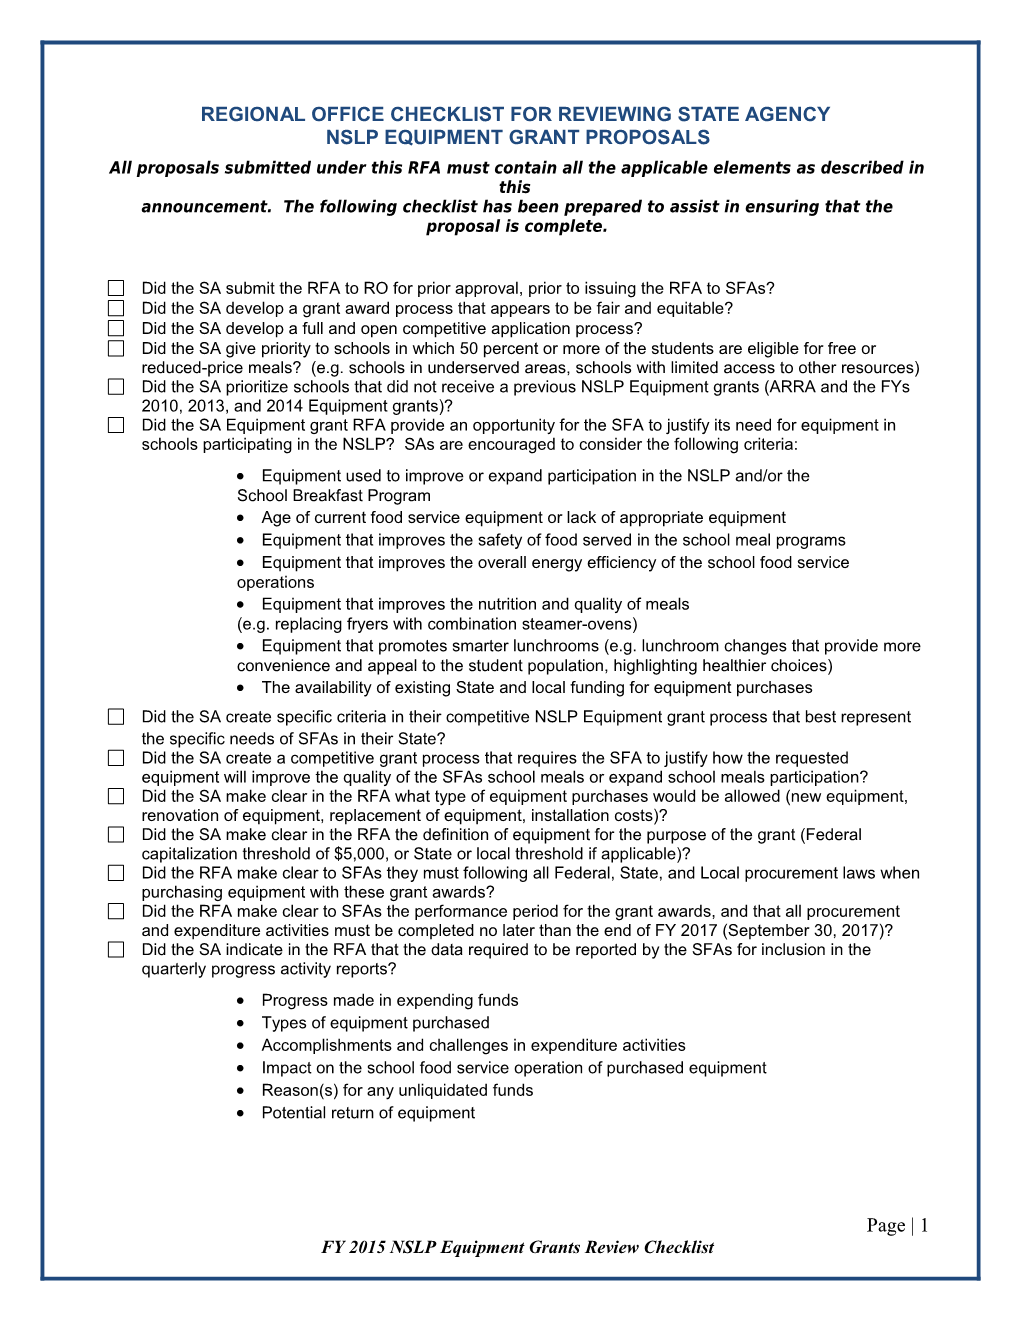 SP26-2015A5: Regional Office Checklist for Reviewing State Agency NSLP Equipment Grant Proposals